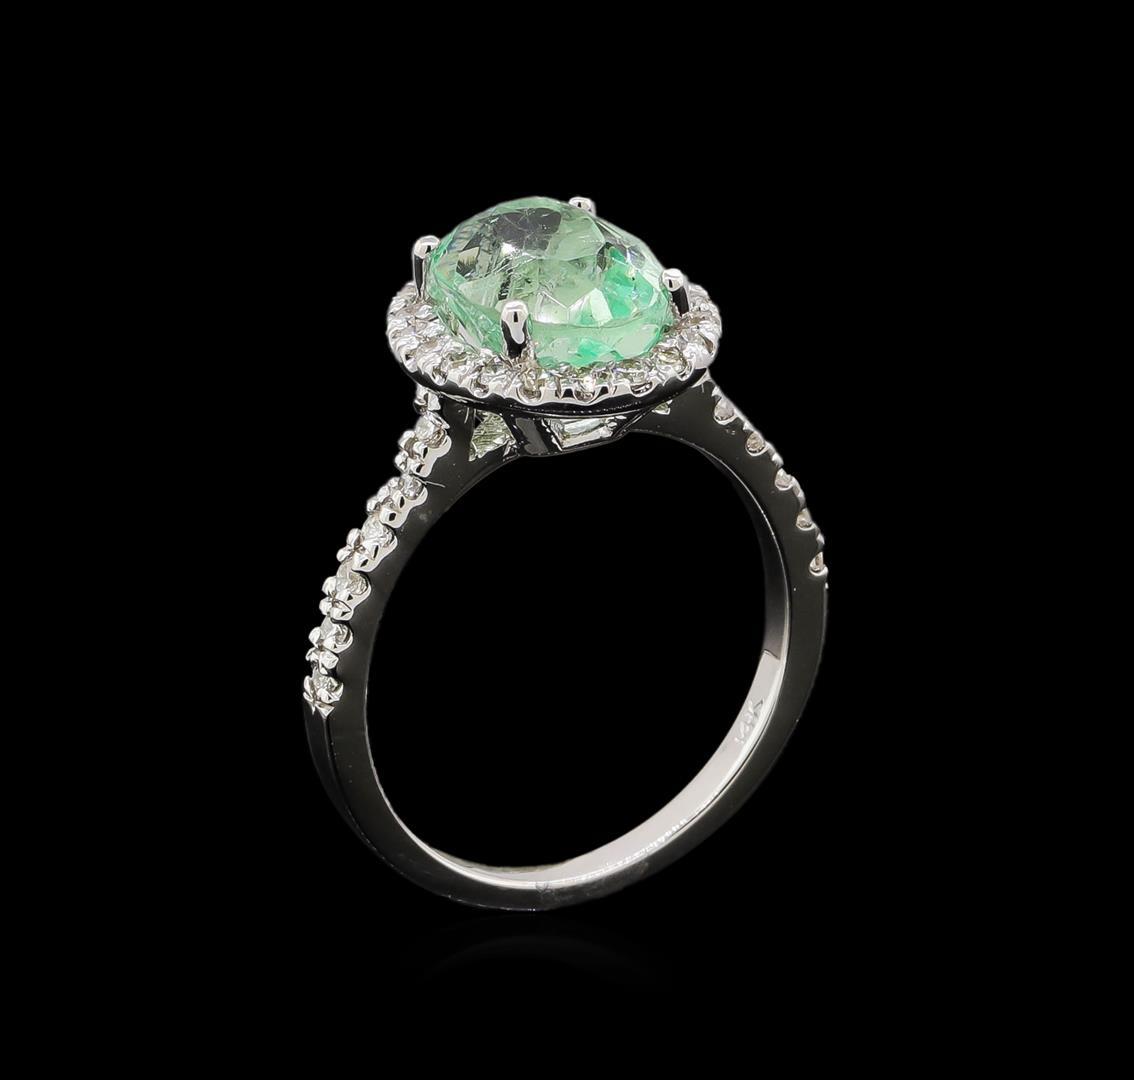 2.75 ctw Emerald and Diamond Ring - 14KT White Gold